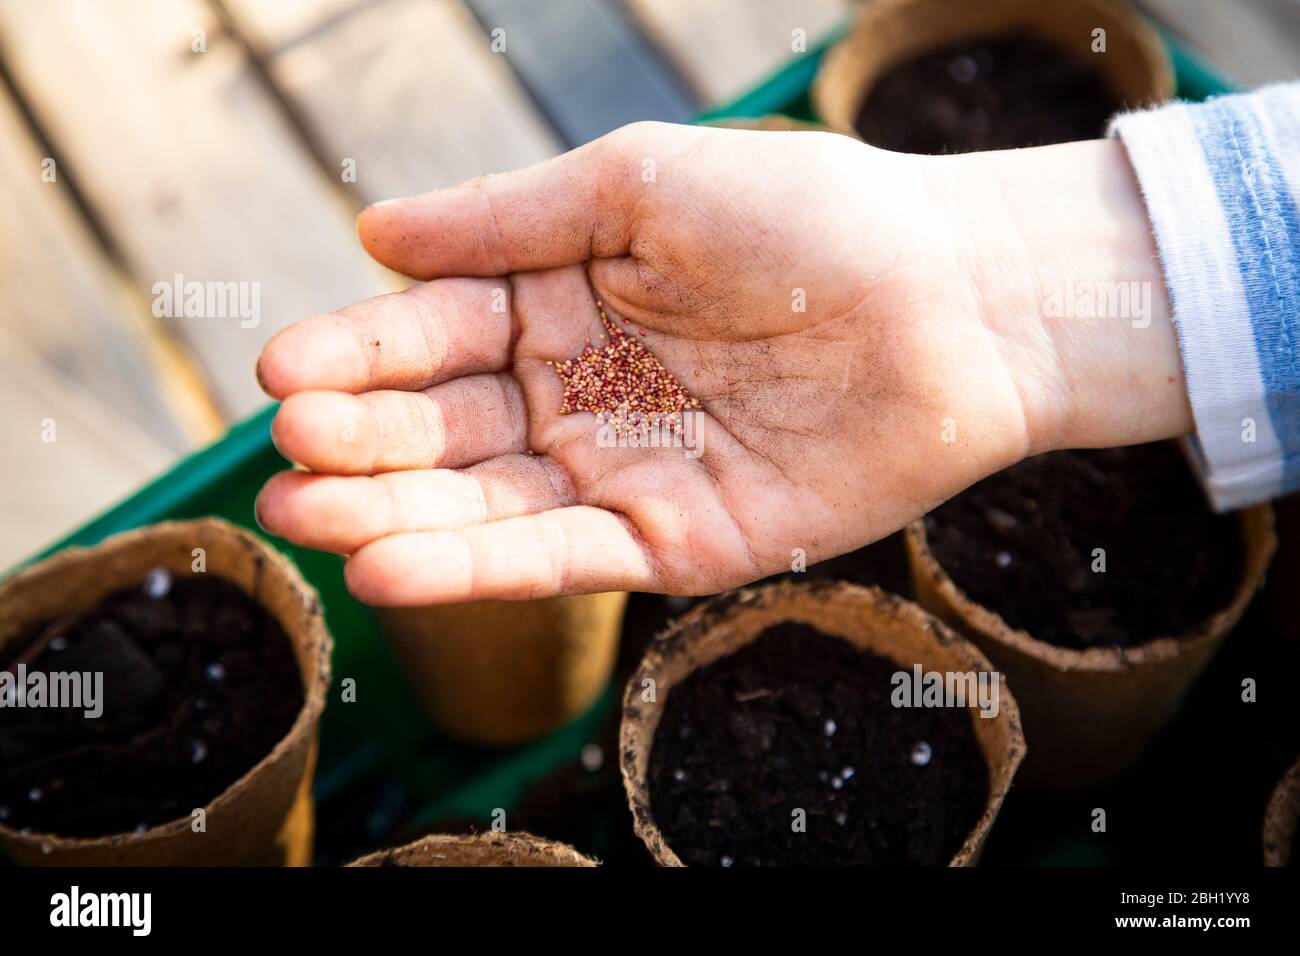 Girl filling nursery pots with soil and seeds Stock Photo